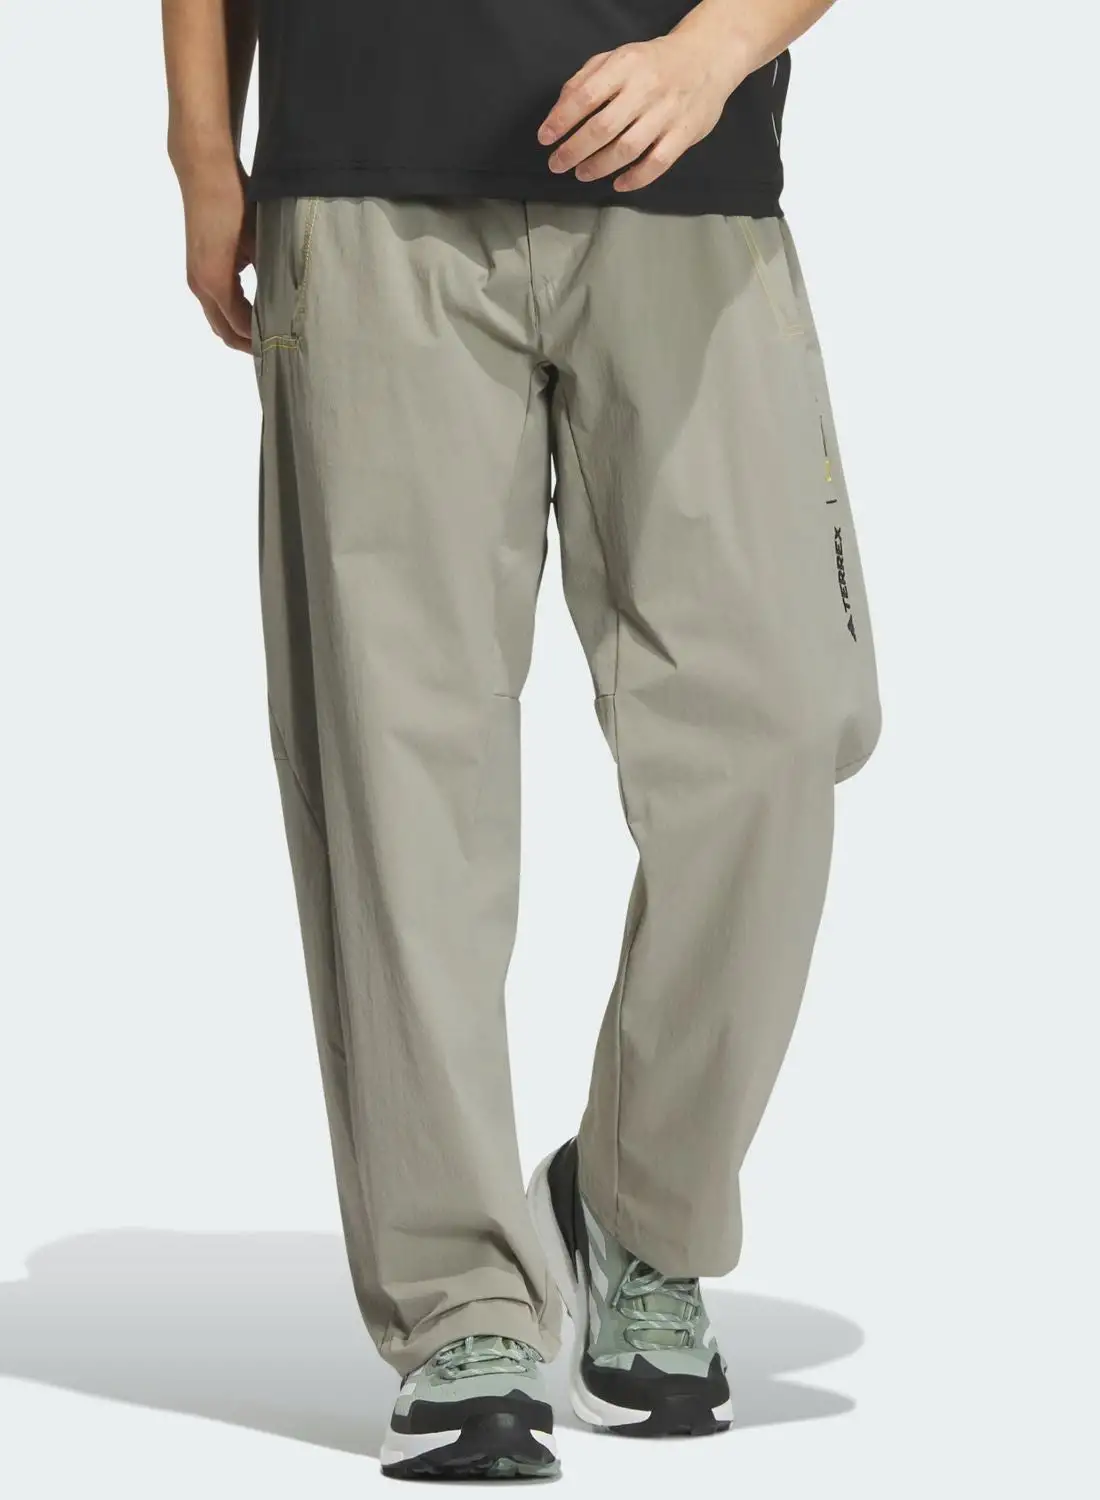 Adidas National Geographic Woven Pants